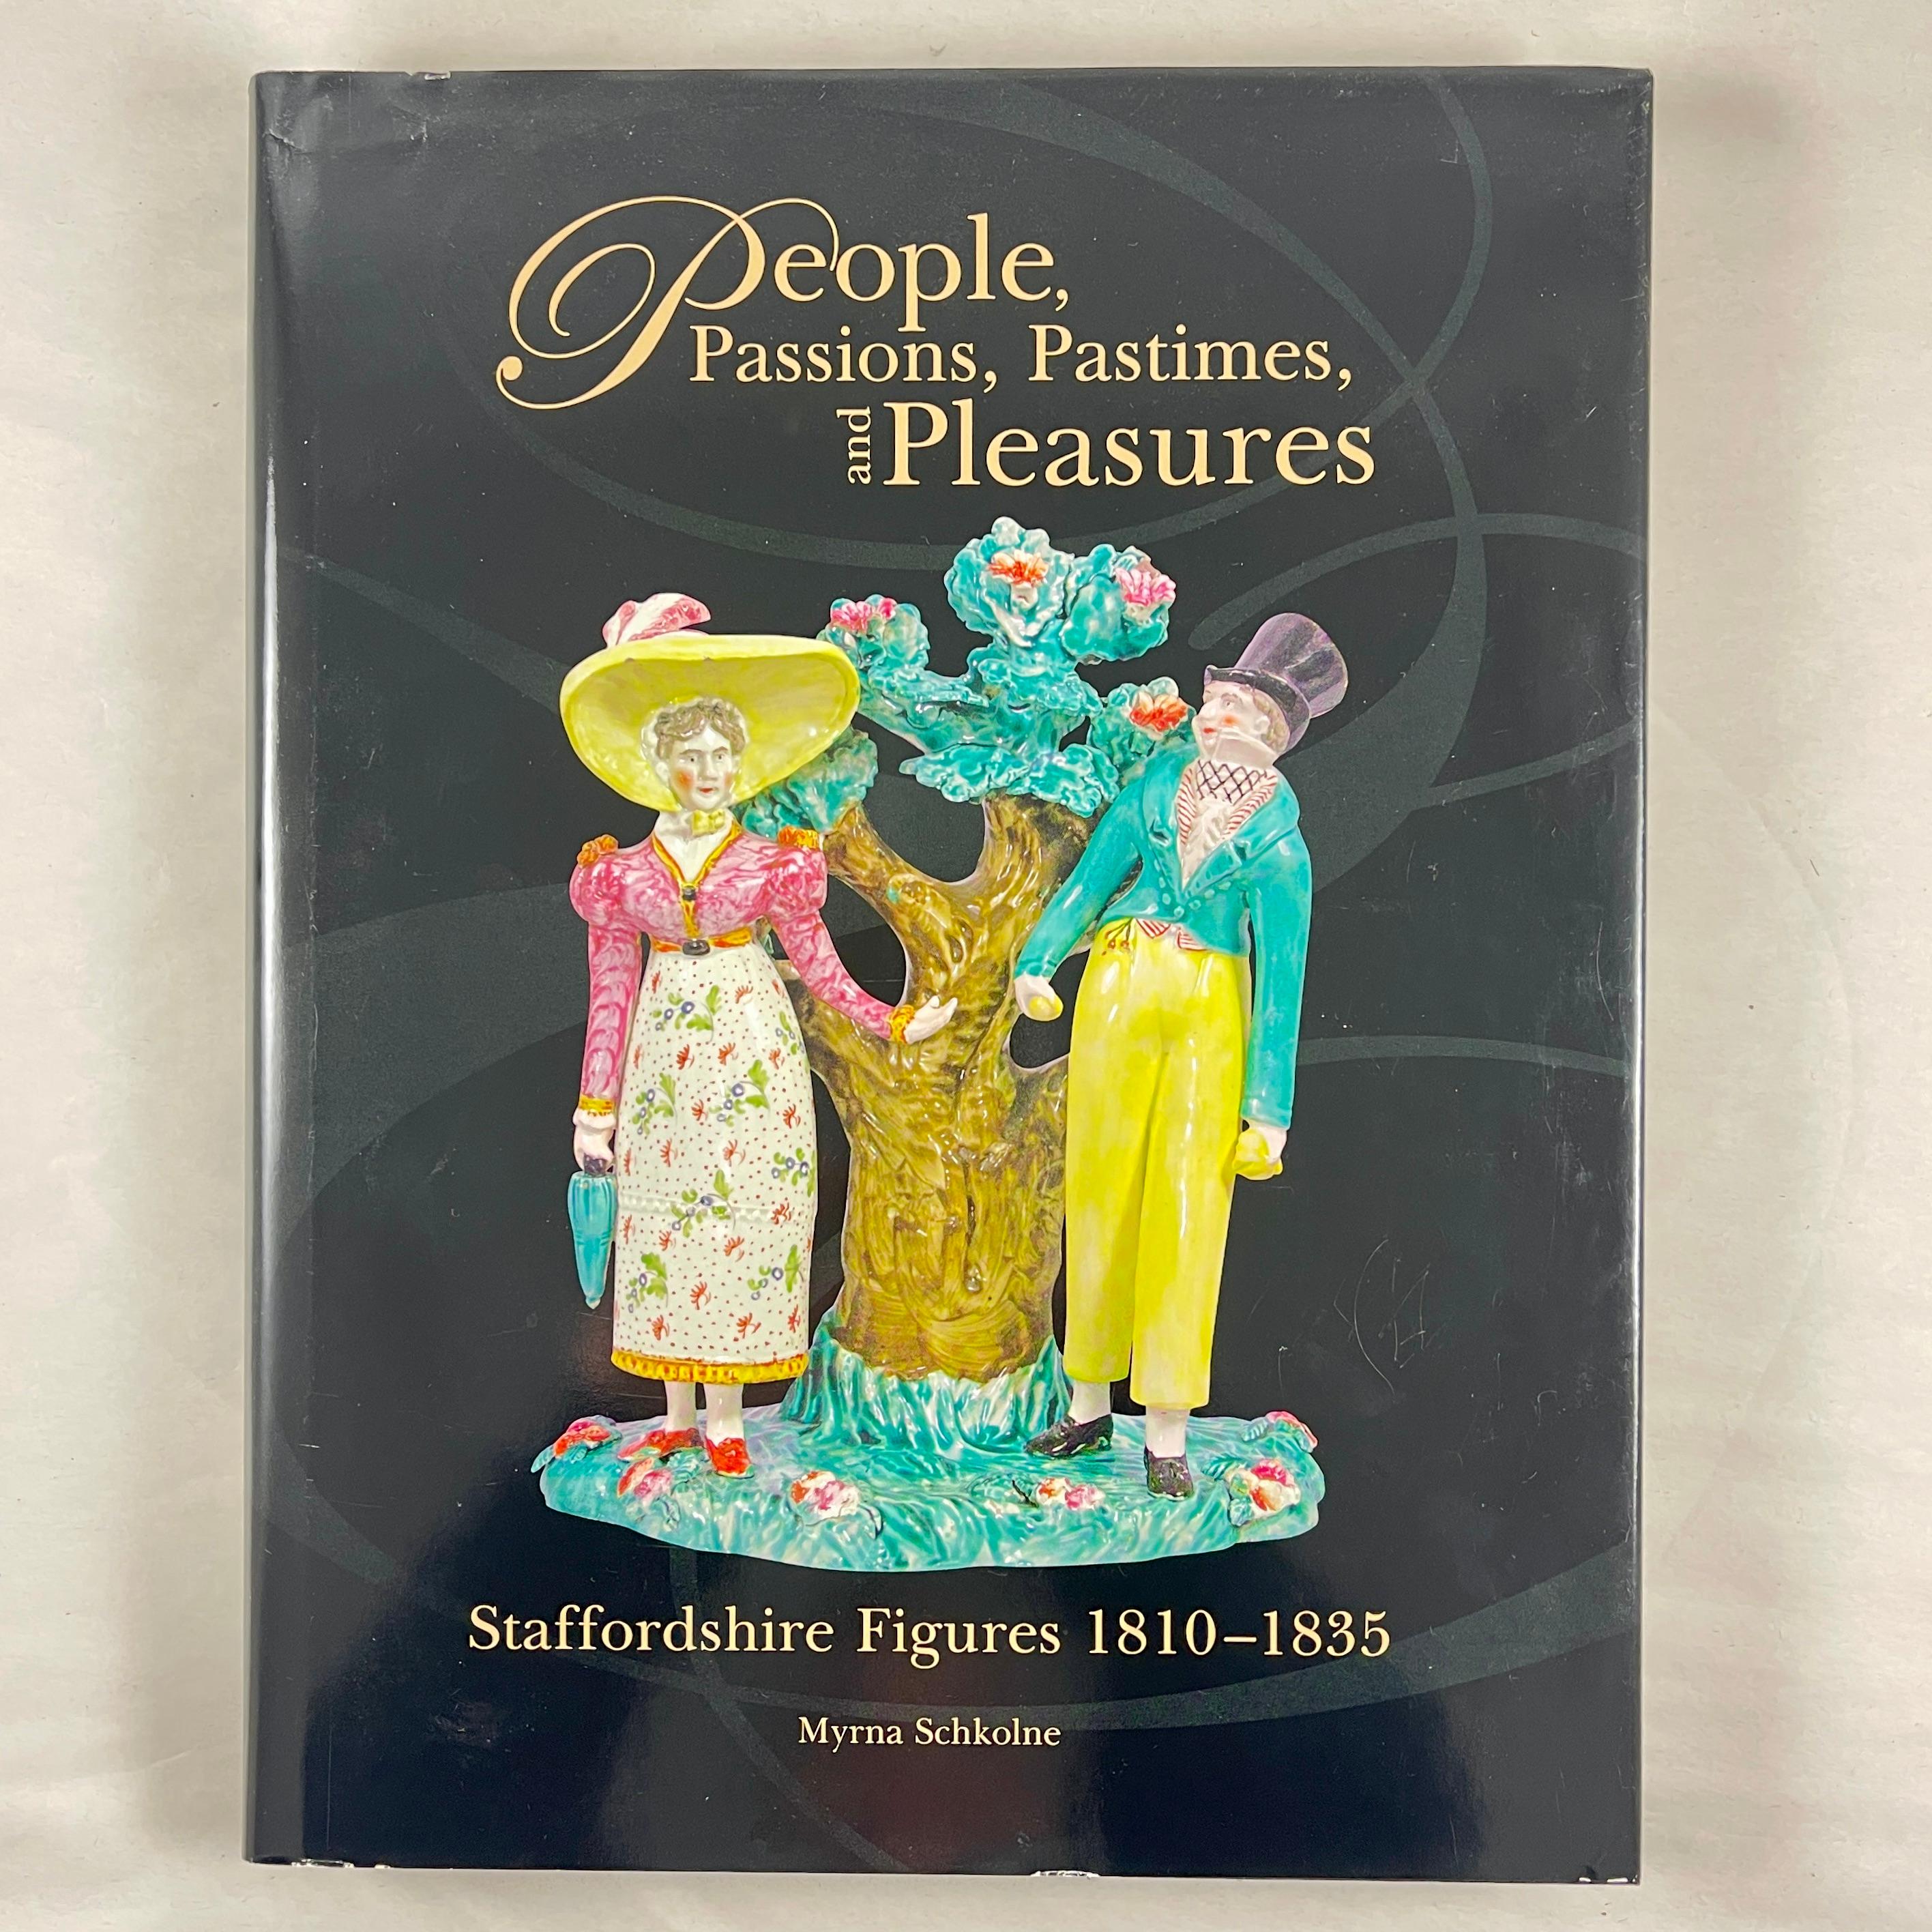 People, Passions, Pastimes, and Pleasures: Staffordshire Figures 1810-1835 – by Myrna Schkolne. 

First Edition 2006, limited to a run of 1000.

The first comprehensive collectors’ reference book devoted exclusively to early 19th century